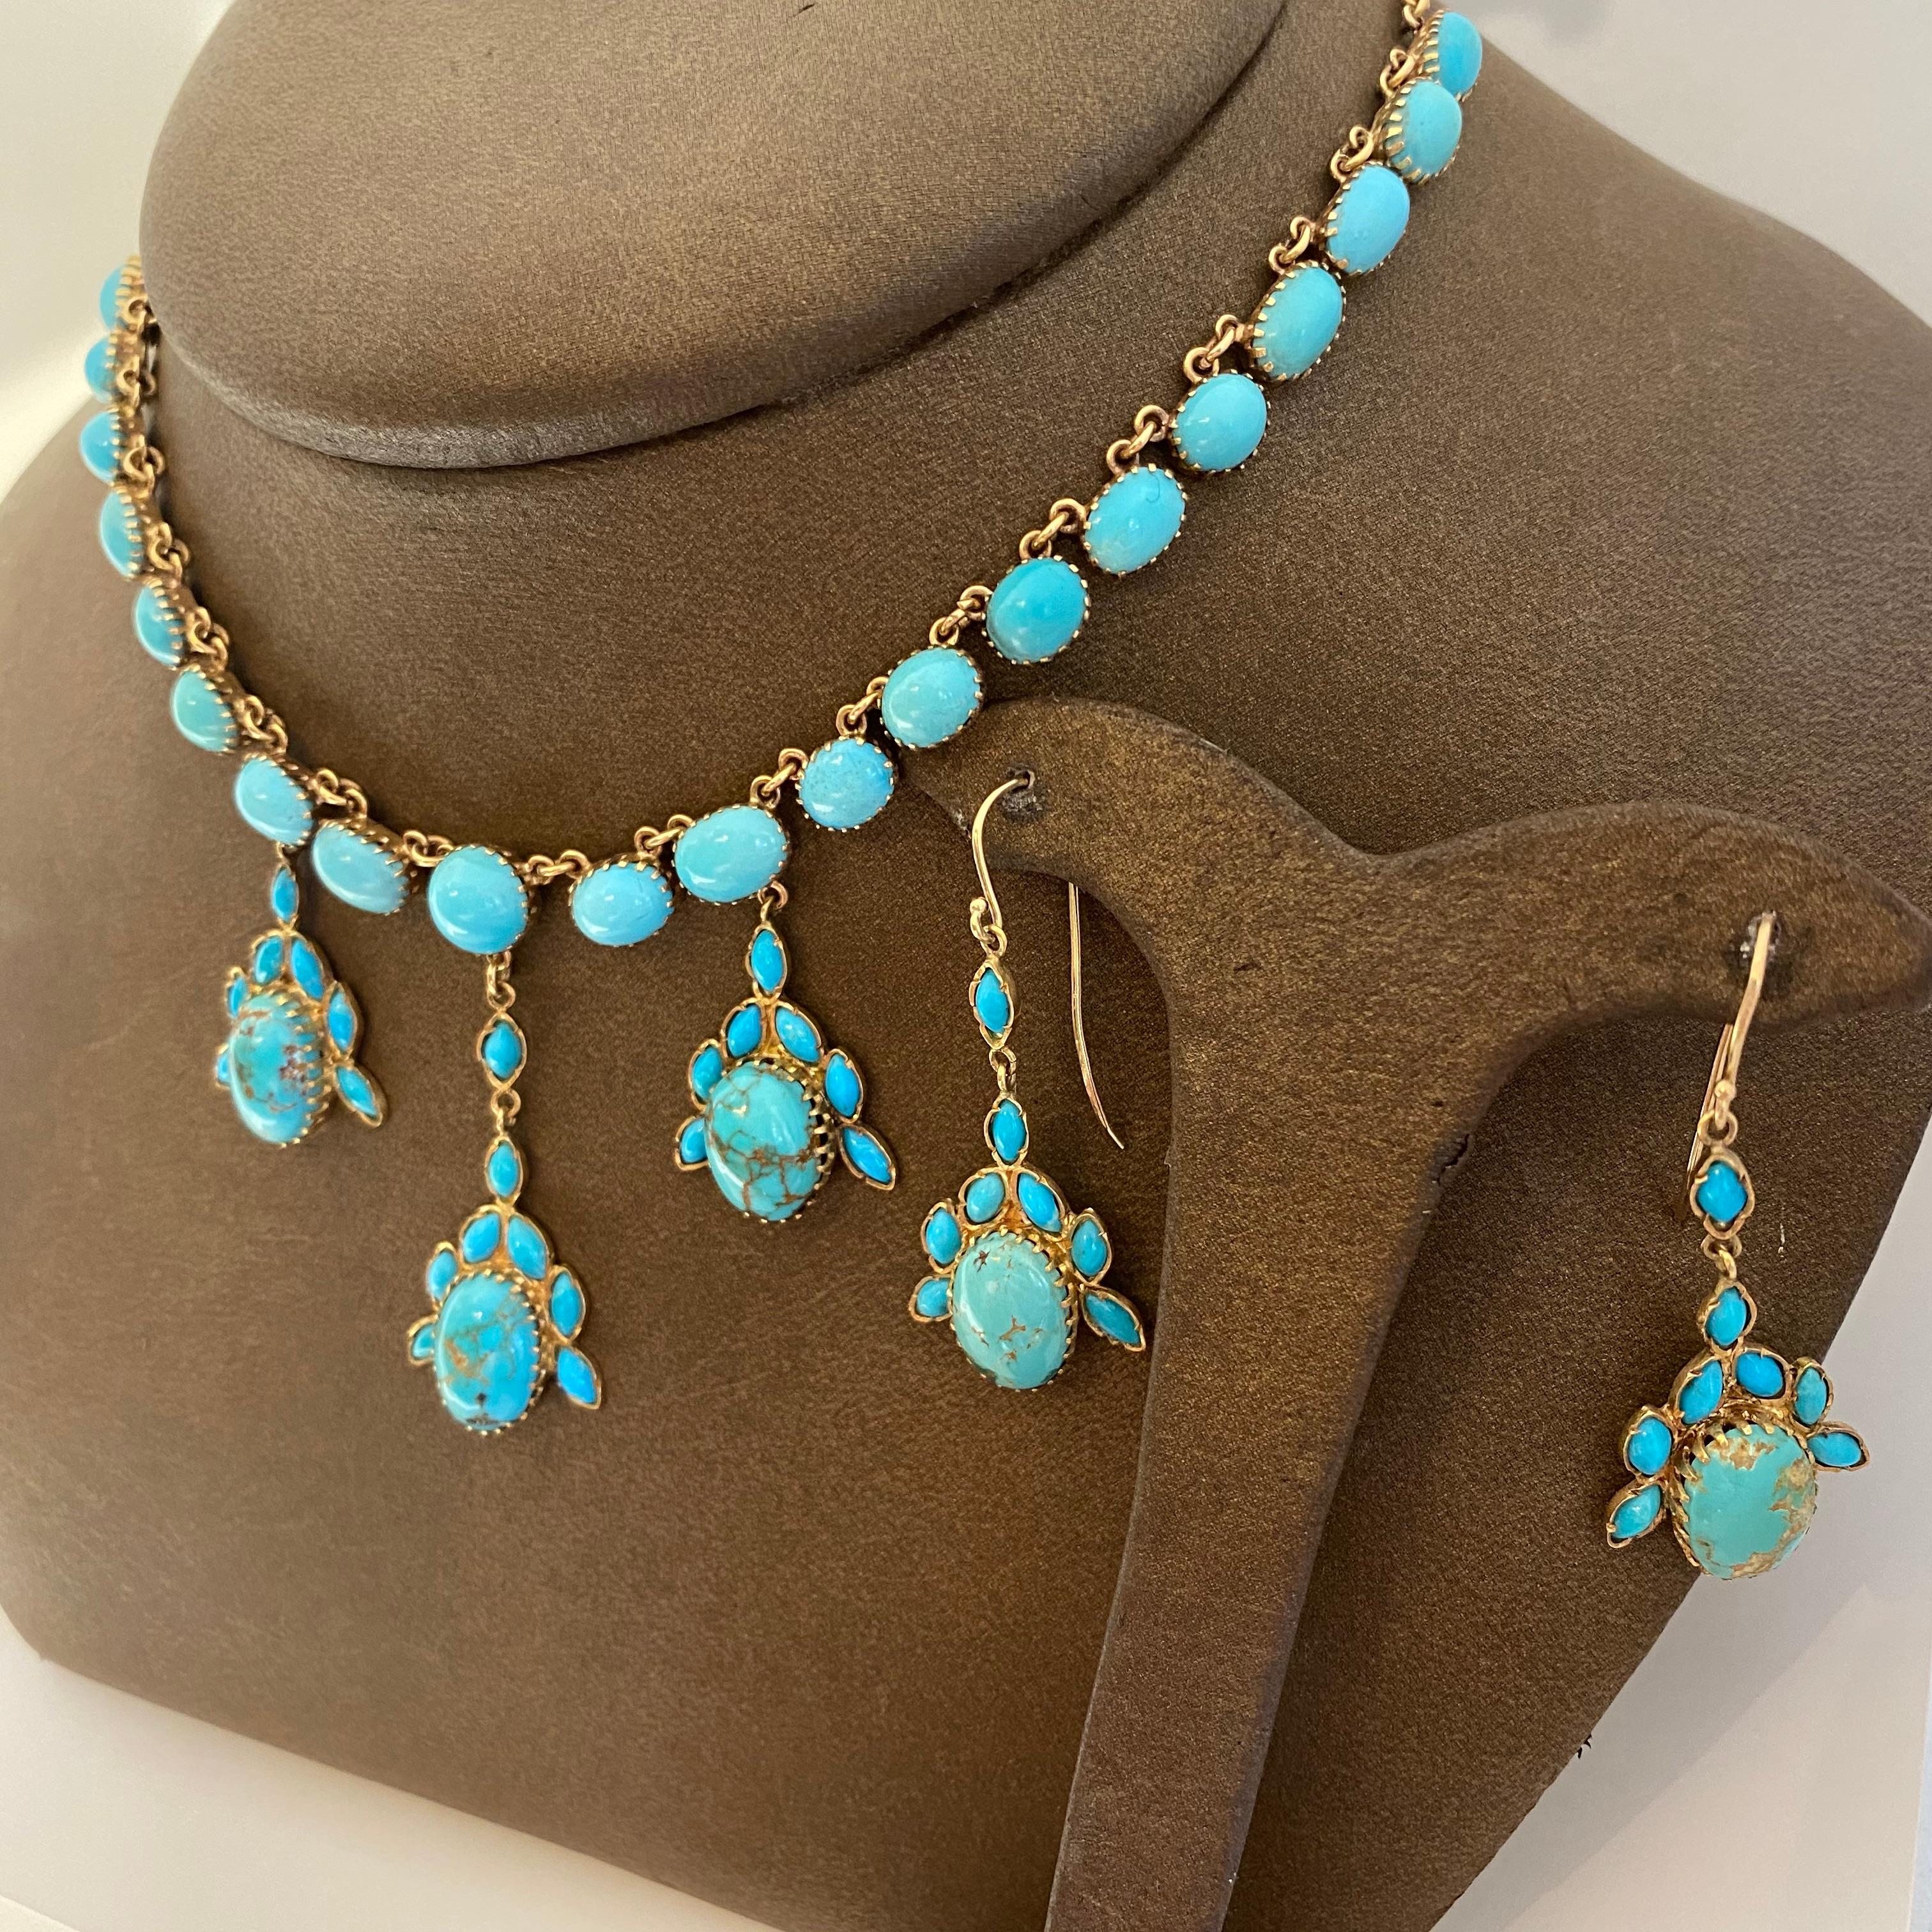 Beautiful estate necklace and earring suite designed in 18 karat yellow gold set with natural turquoise. The necklace has three graduated drops with oval and marquise cabochon turquoise gemstones. The earrings match with a fishhook earring wire.